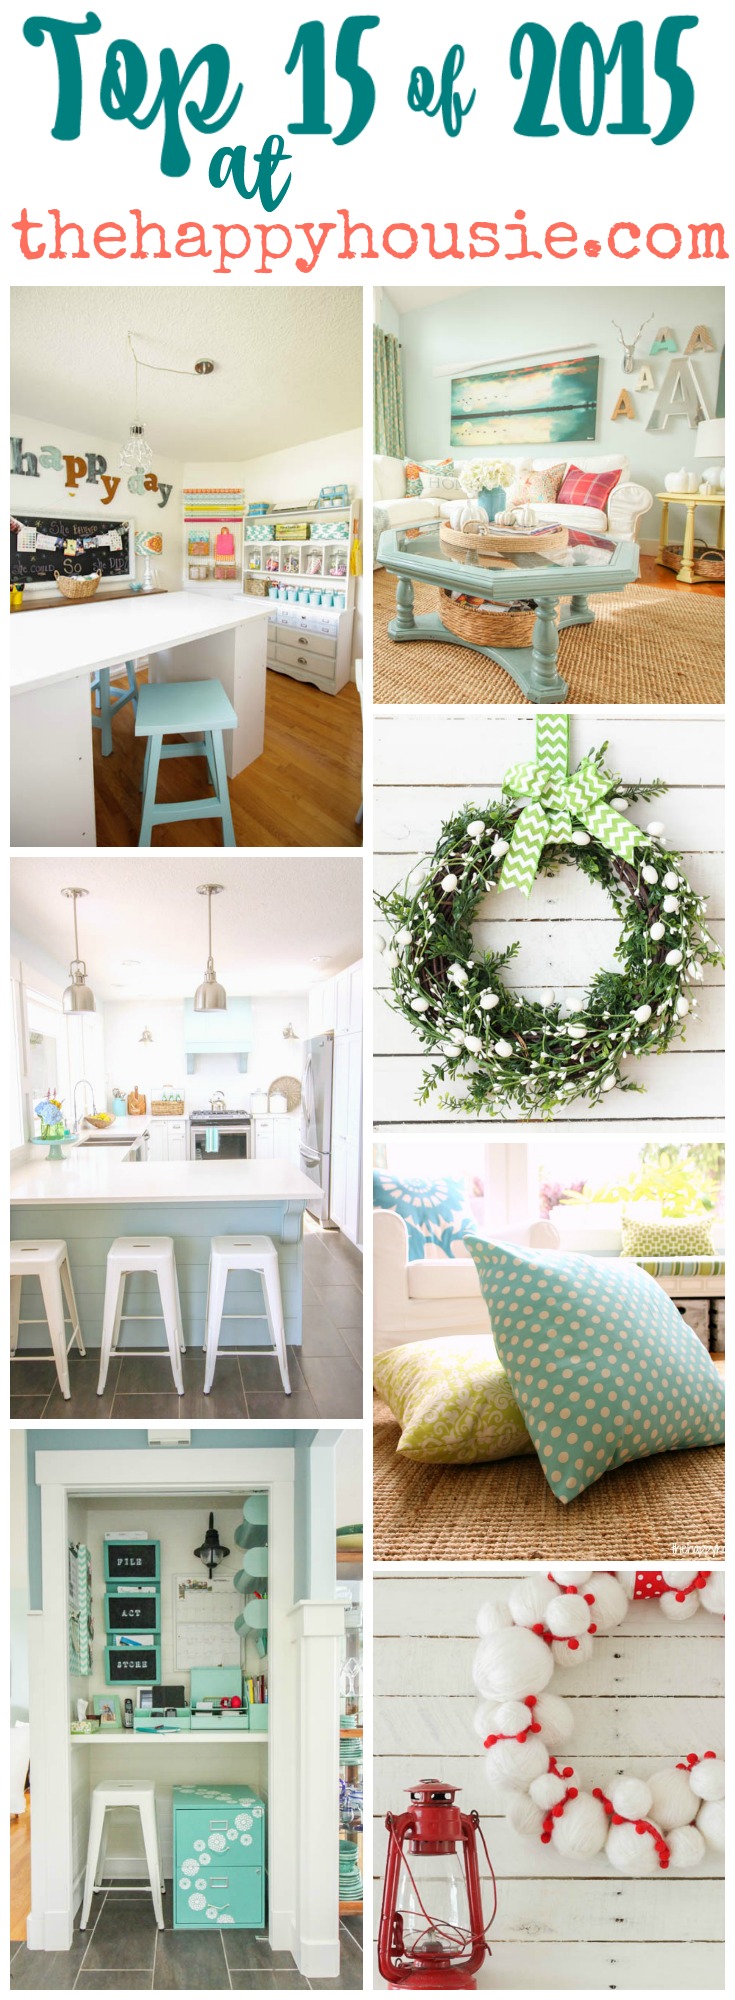 Top 15 posts, projects, DIYs, and crafts of 2015 at thehappyhousie.com